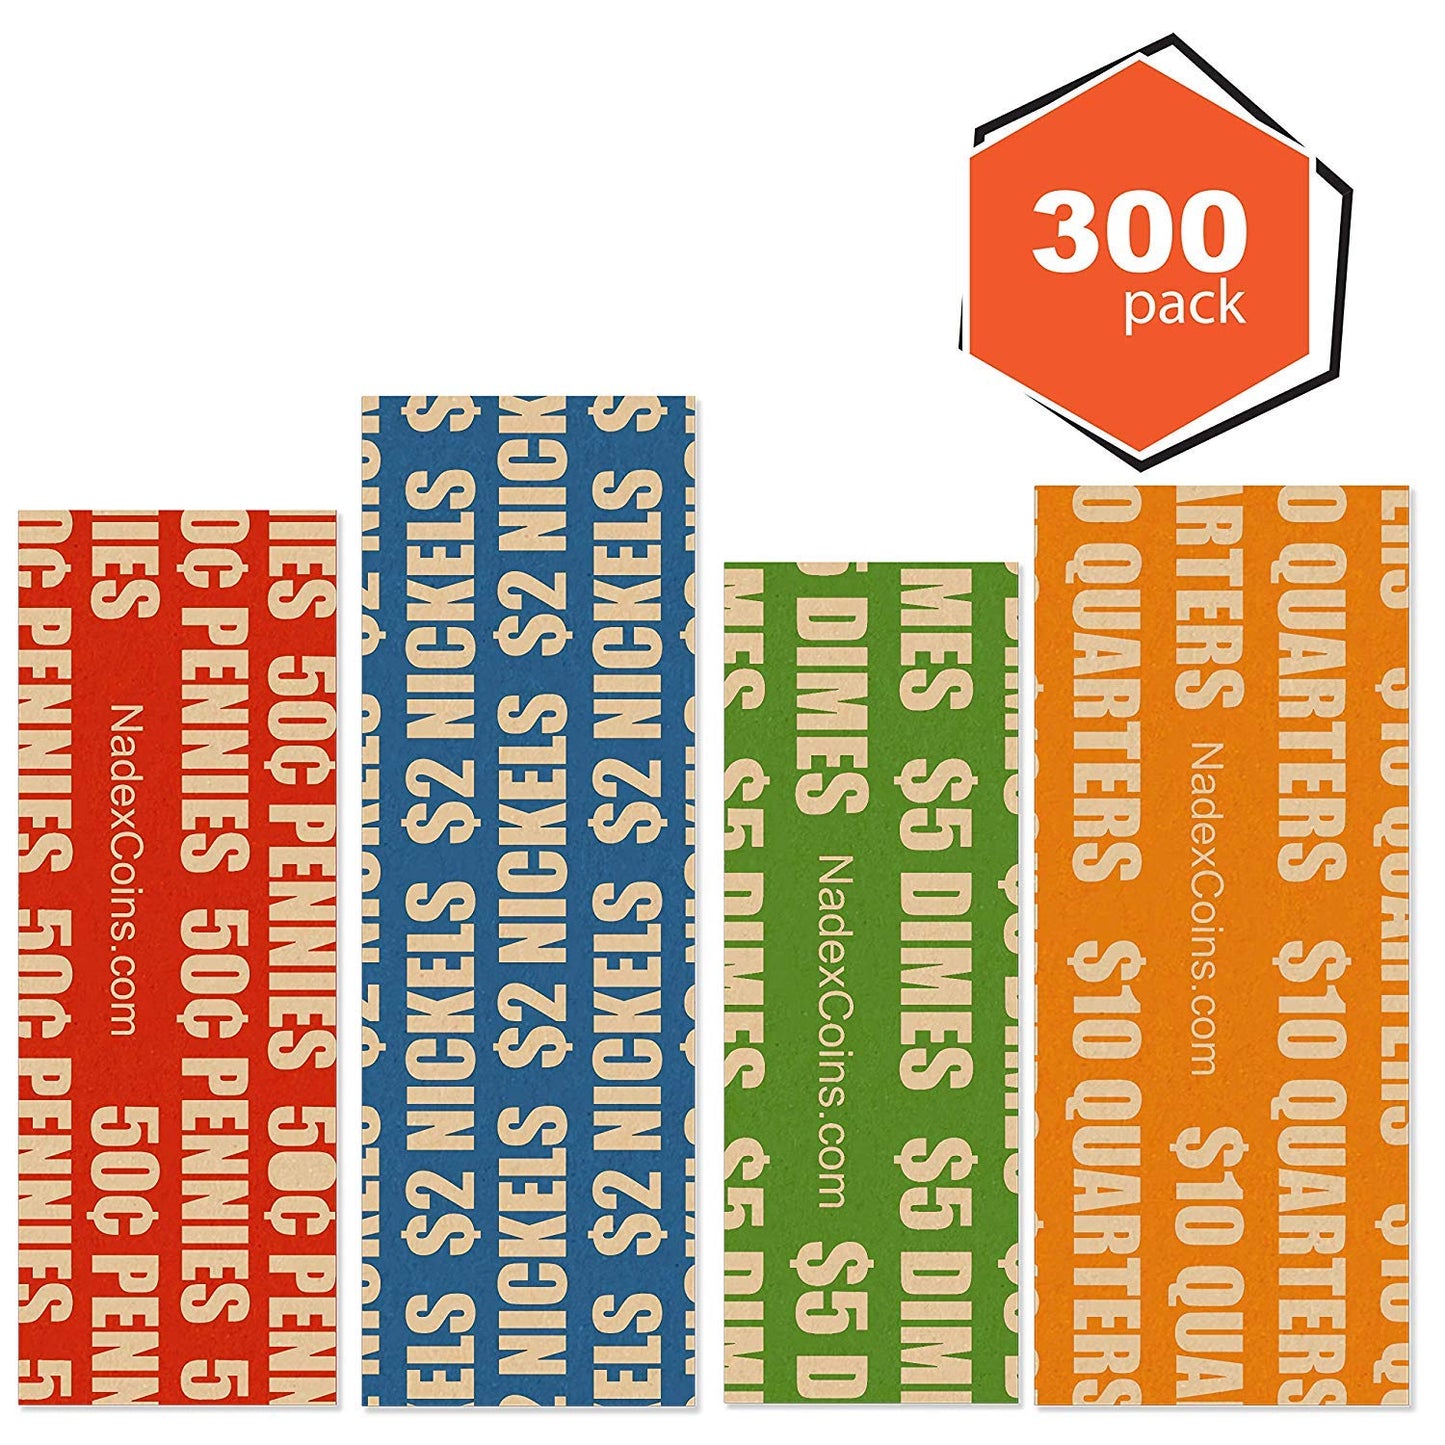 300 Flat Bright Coin Wrappers